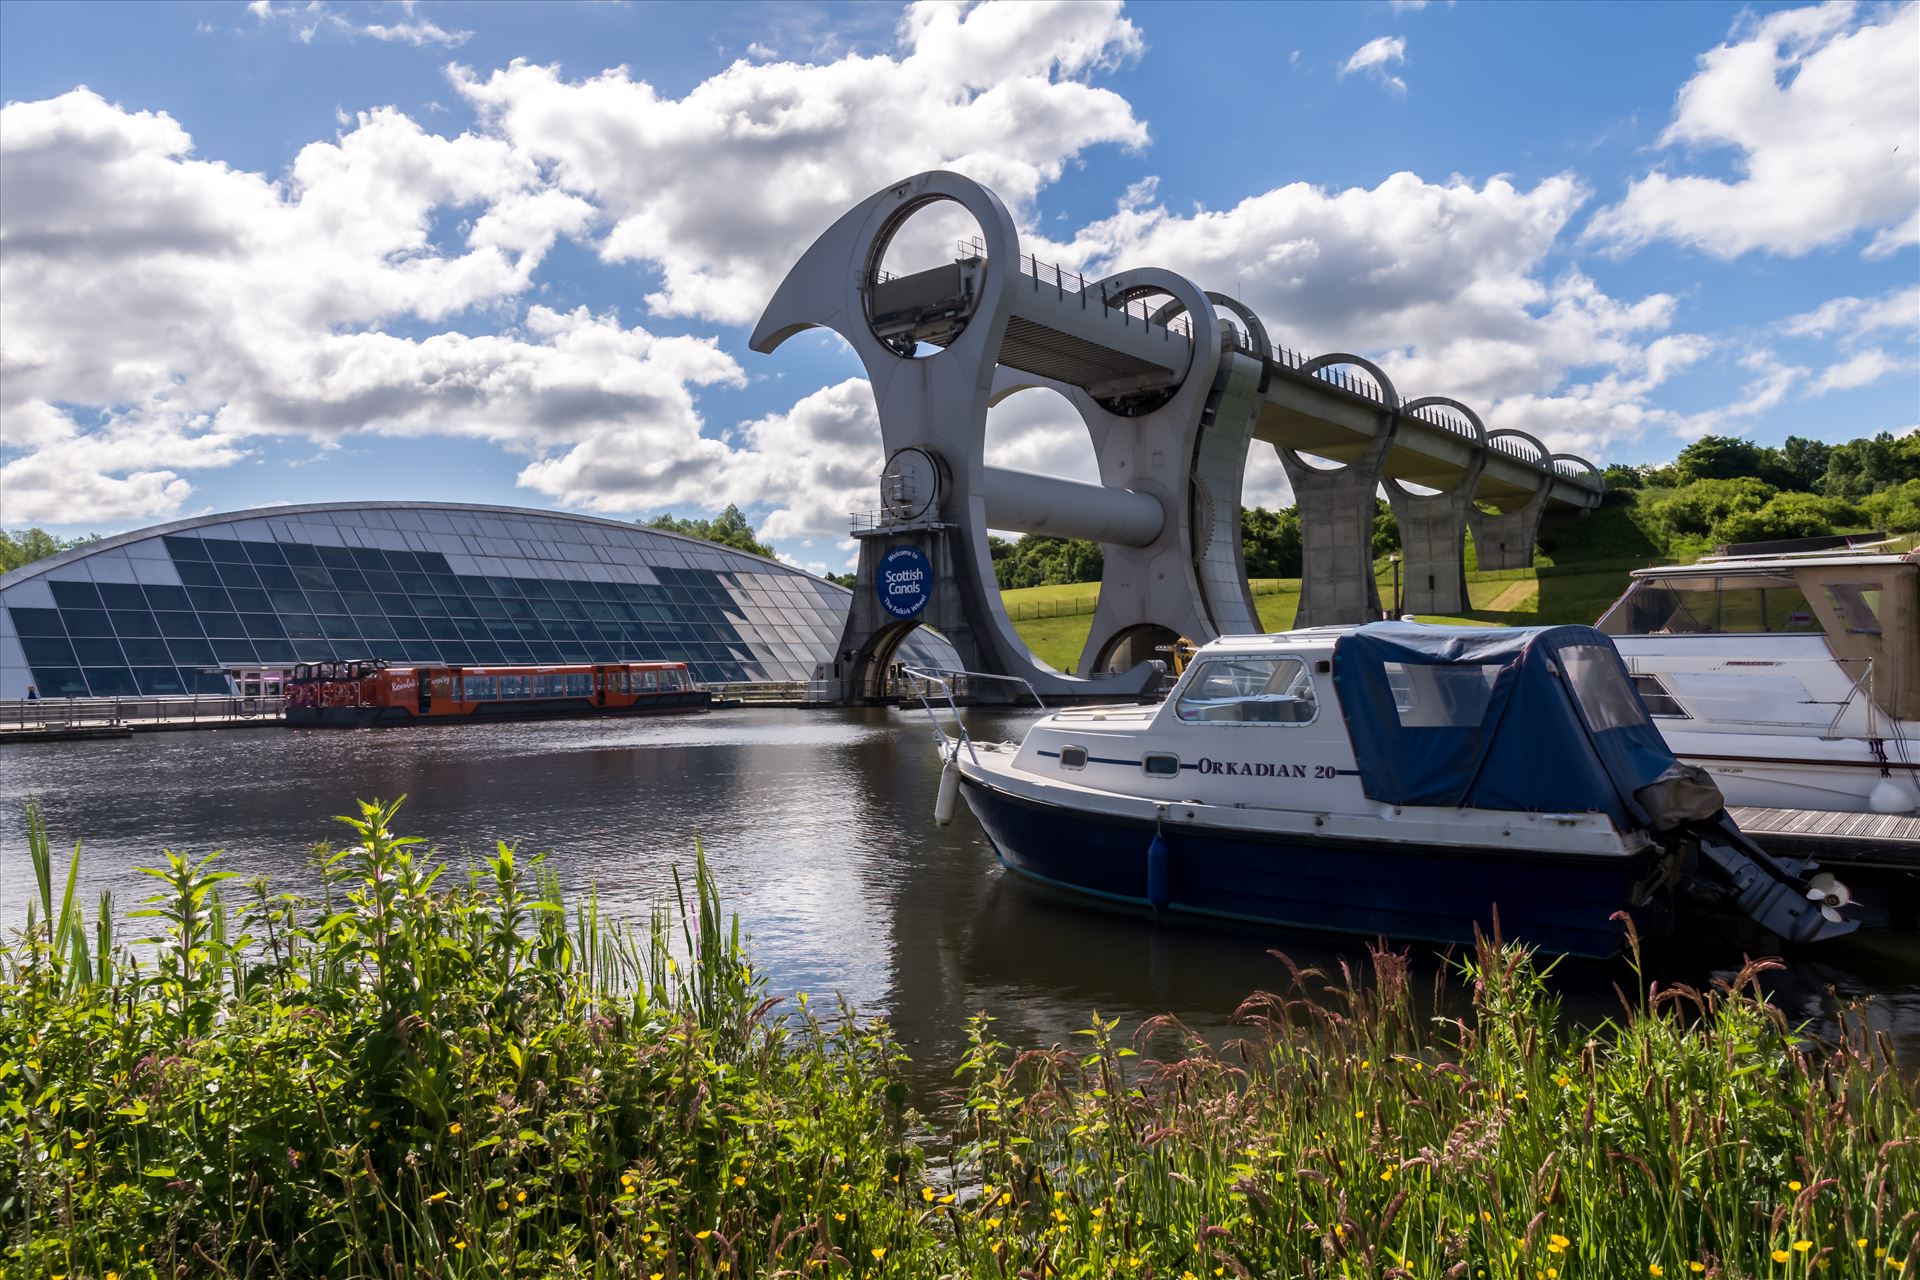 The Falkirk Wheel - The Falkirk Wheel is a rotating boat lift in Scotland, connecting the Forth and Clyde Canal with the Union Canal. It opened in 2002, reconnecting the two canals for the first time since the 1930s as part of the Millennium Link project. by philreay